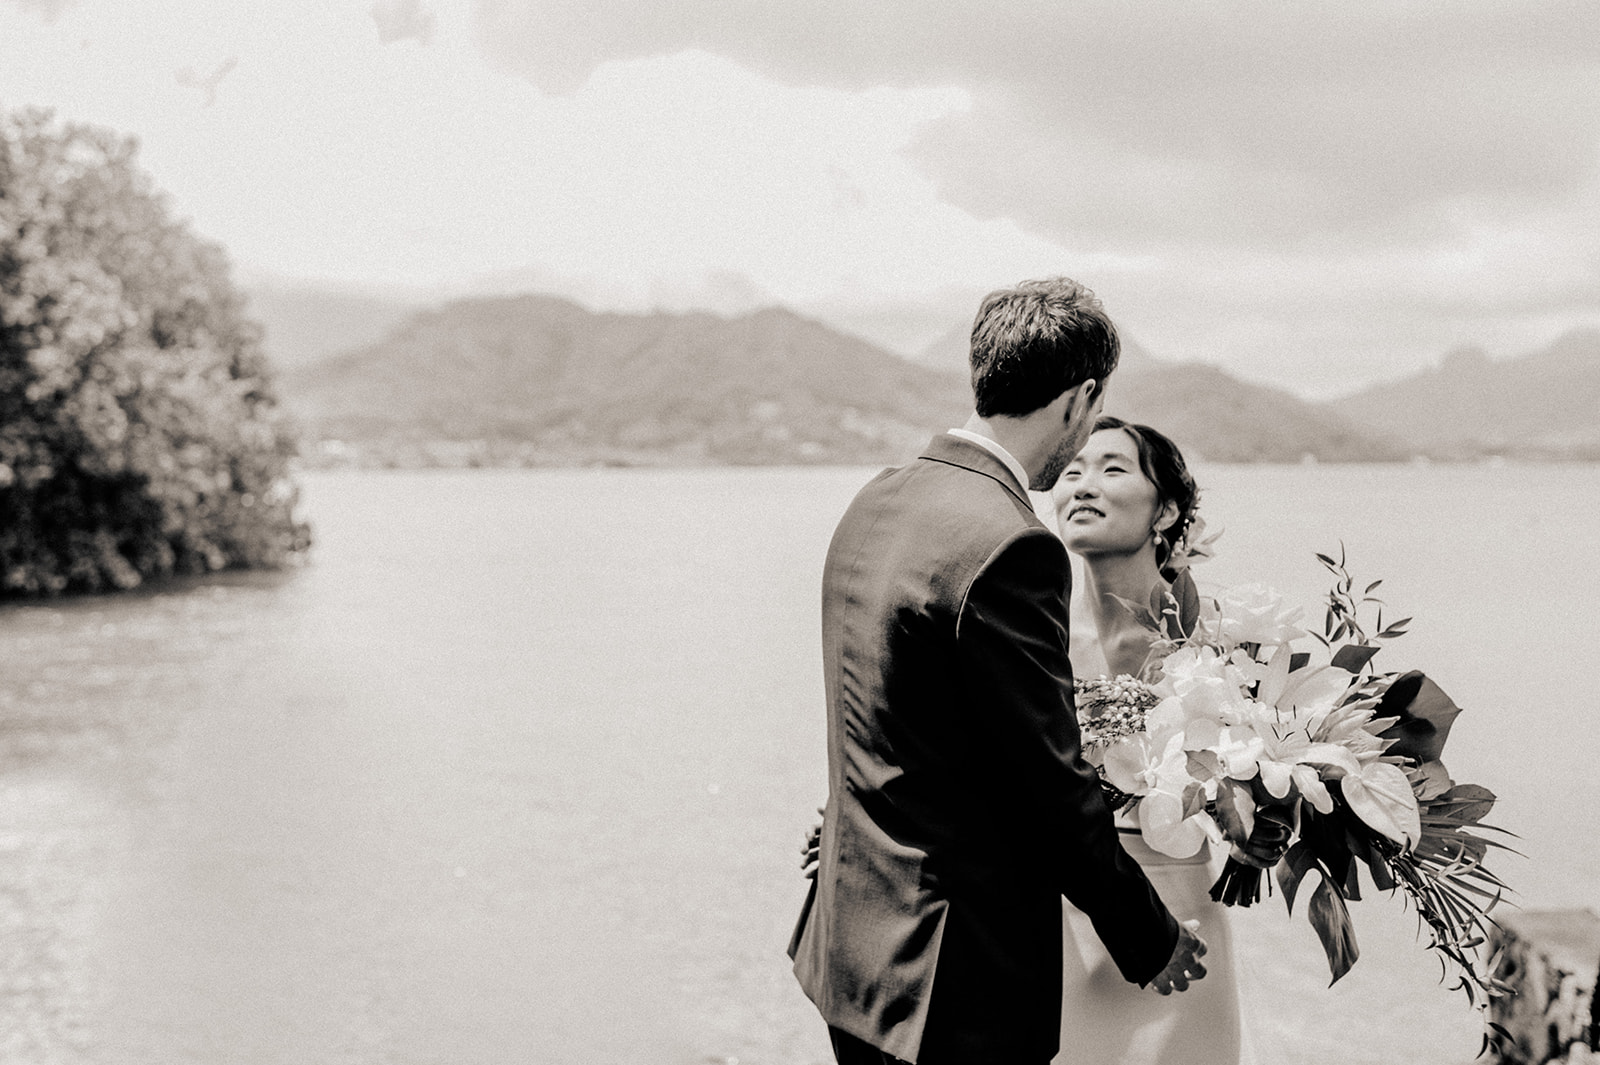 Enchanting scene as the couple shares a romantic moment against the stunning backdrop of sea and mountains L Hewitt Photography